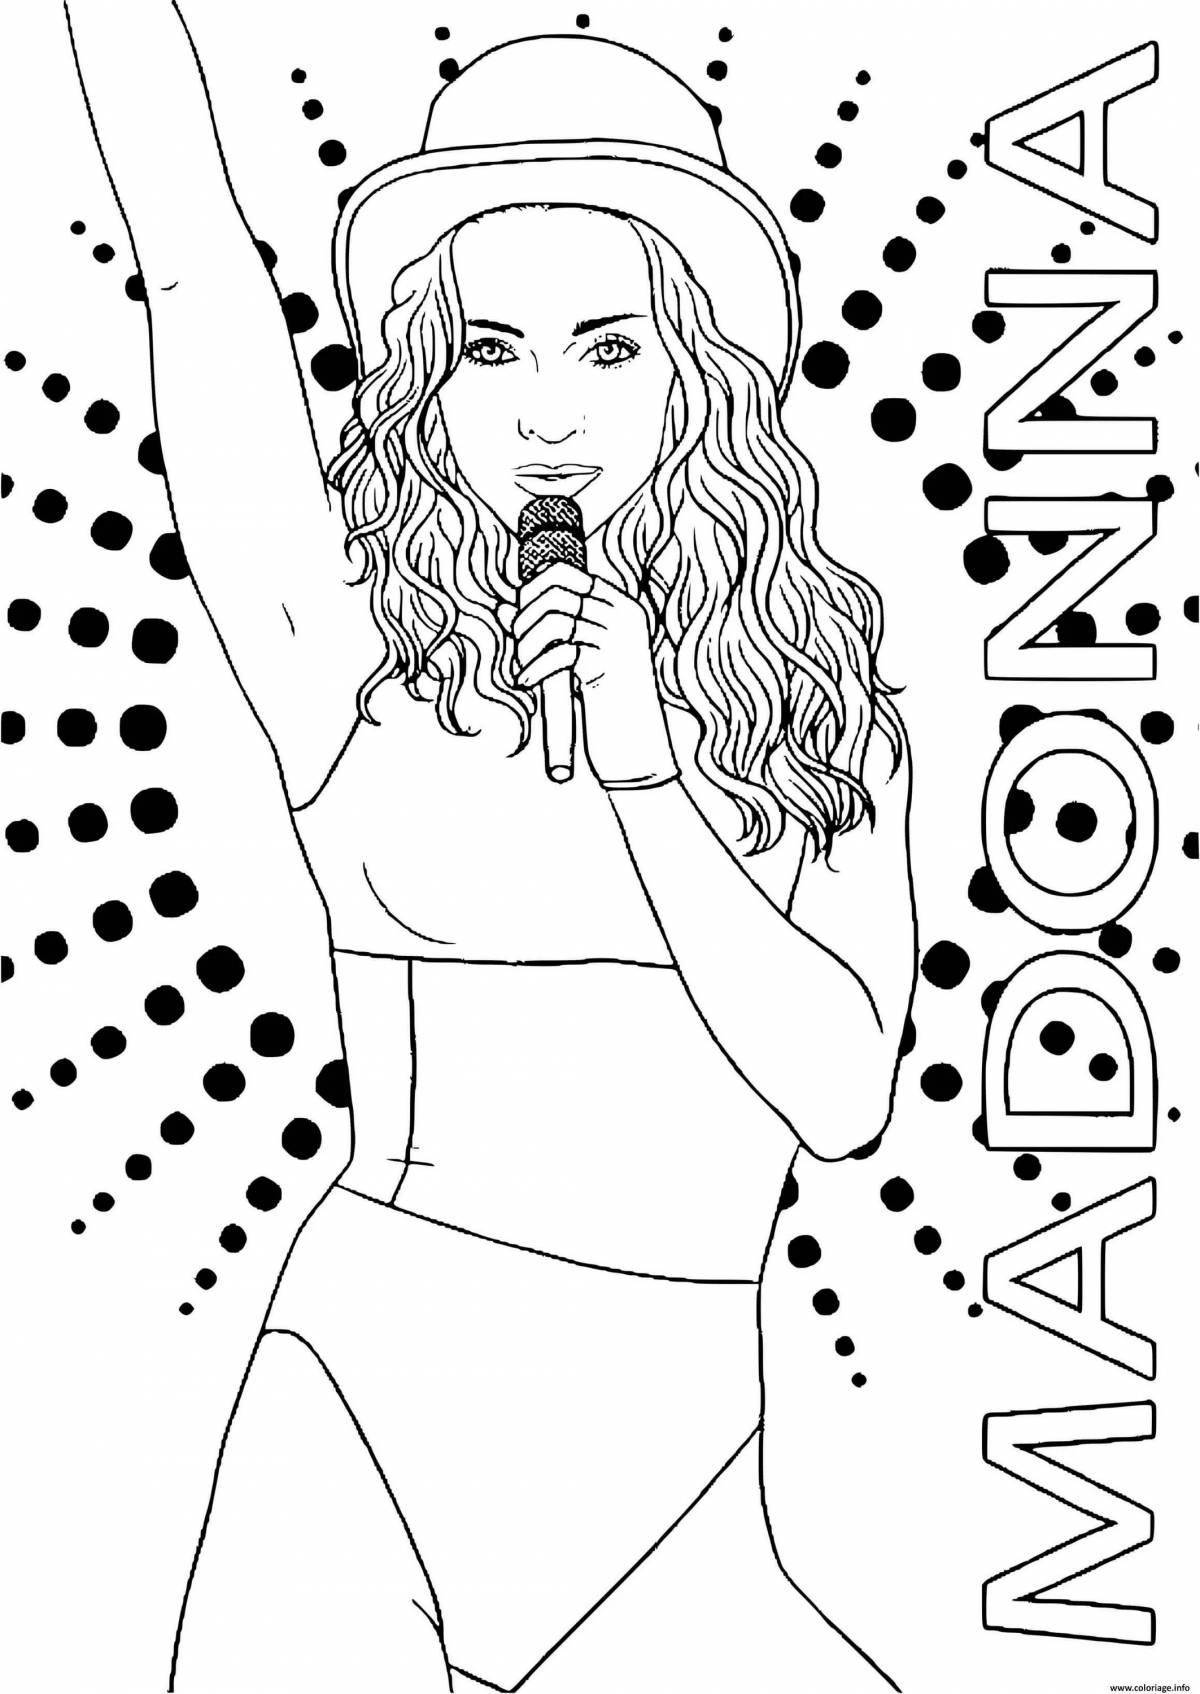 Awesome celebrity coloring pages